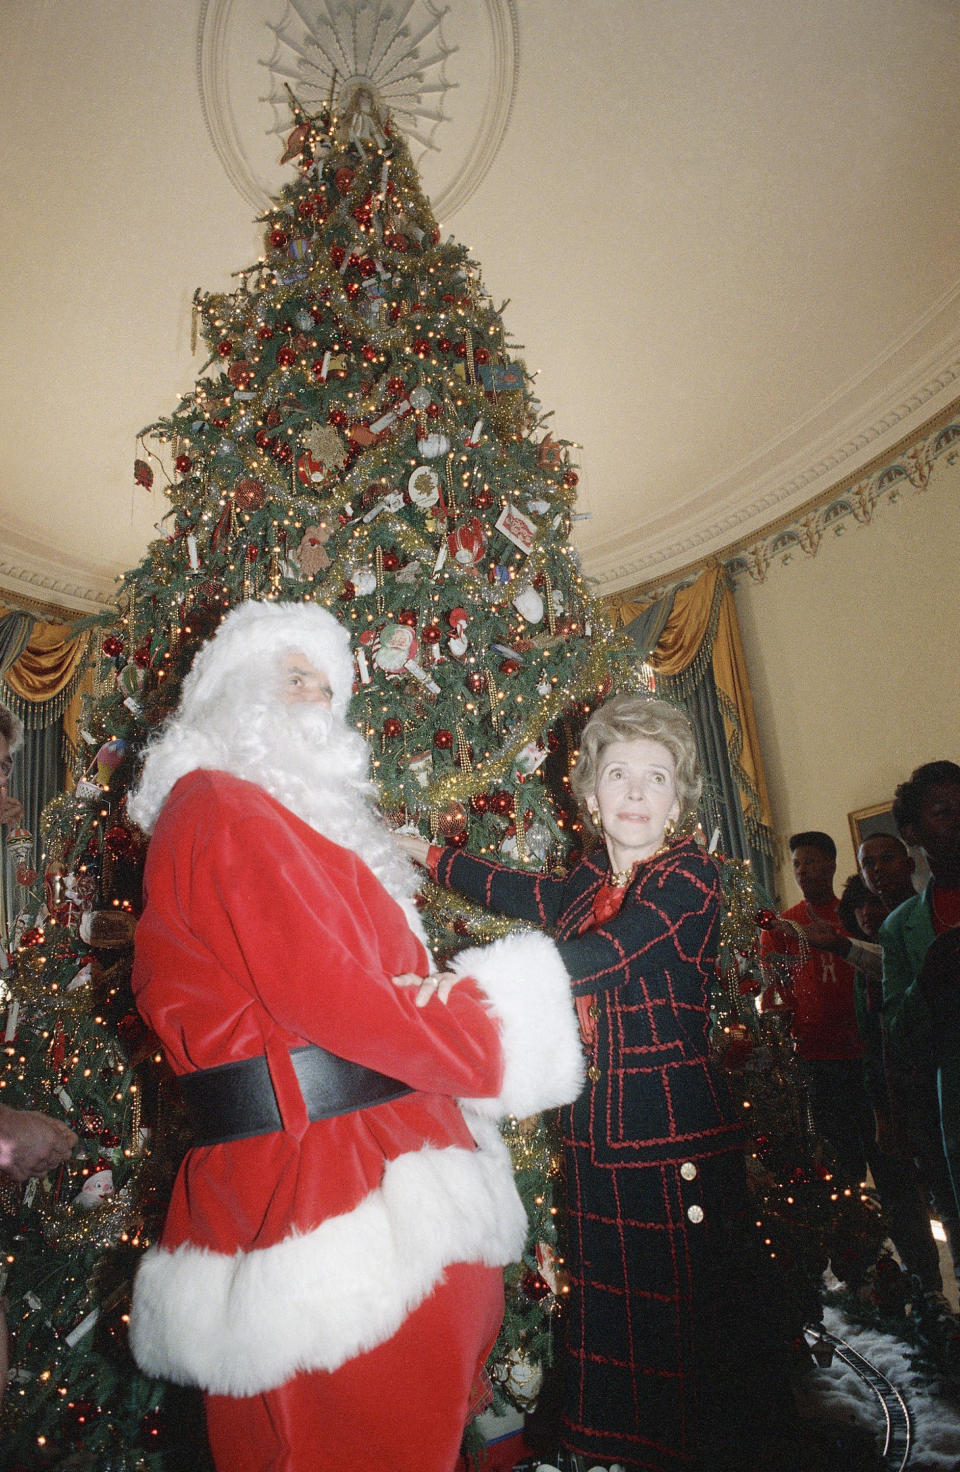 First lady Nancy Reagan with the help of comedian Rich Little, dressed as Santa Clause, takes part in the press preview of the White House Christmas decorations on Monday, Dec. 12, 1988 in Washington. This will be the last Christmas of the Reagan era. (AP Photo/Barry Thumma)